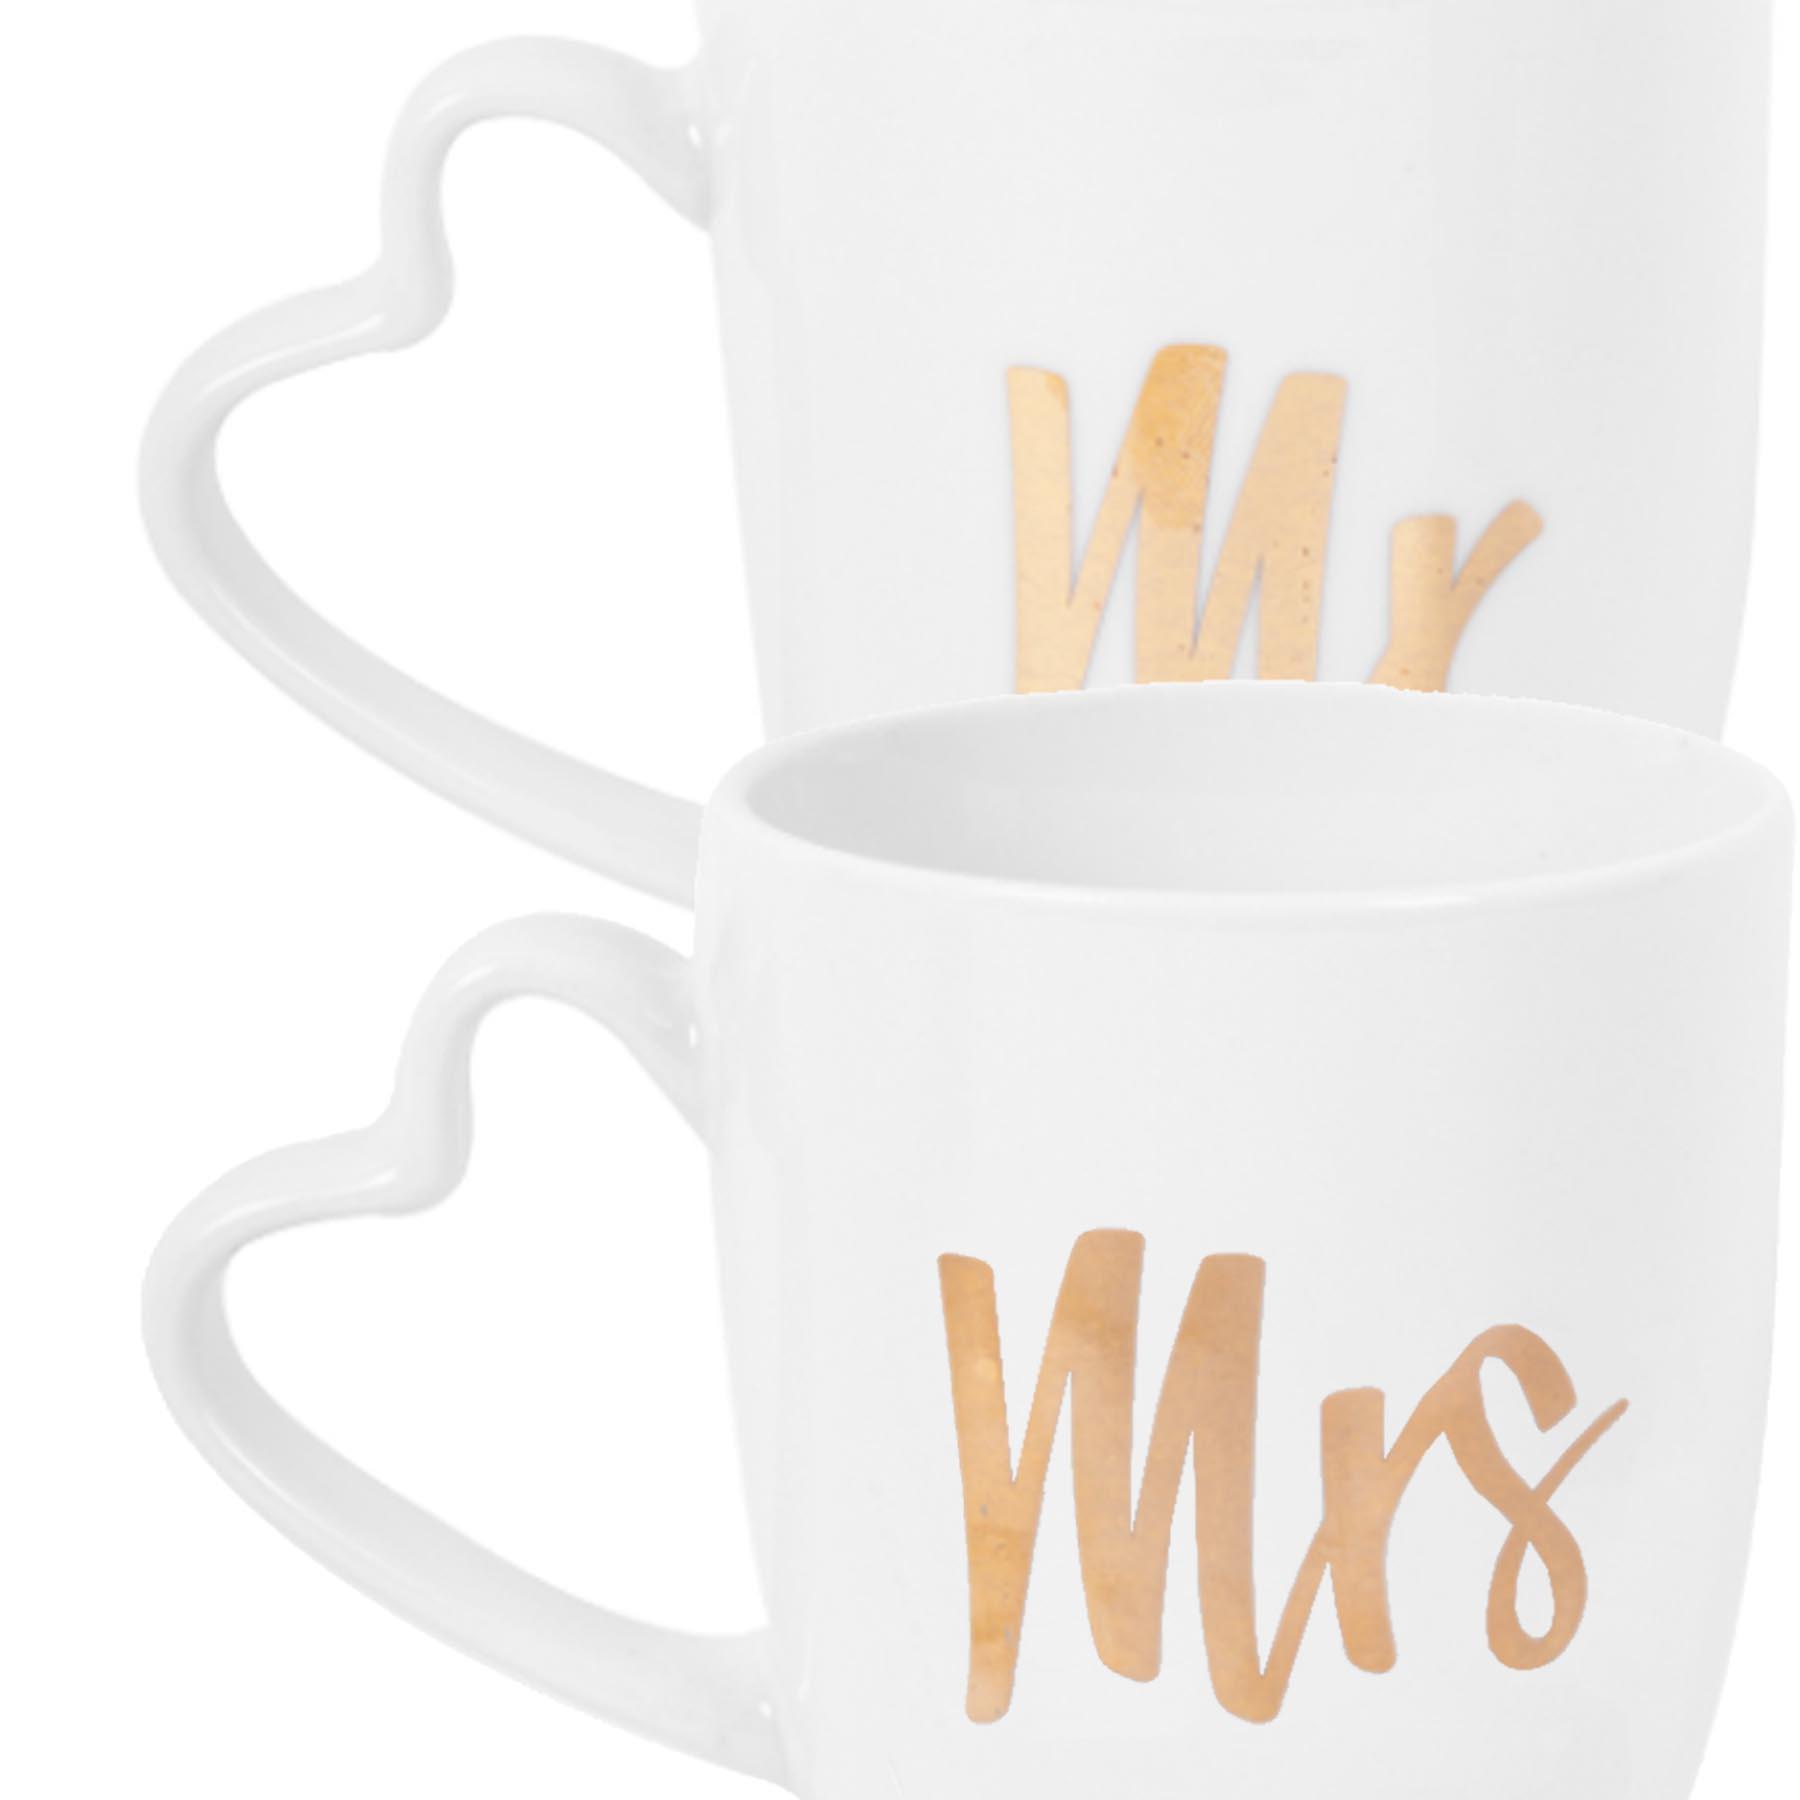 Perfect Day Wedding Mug Set White with Gold Mr and Mrs Text